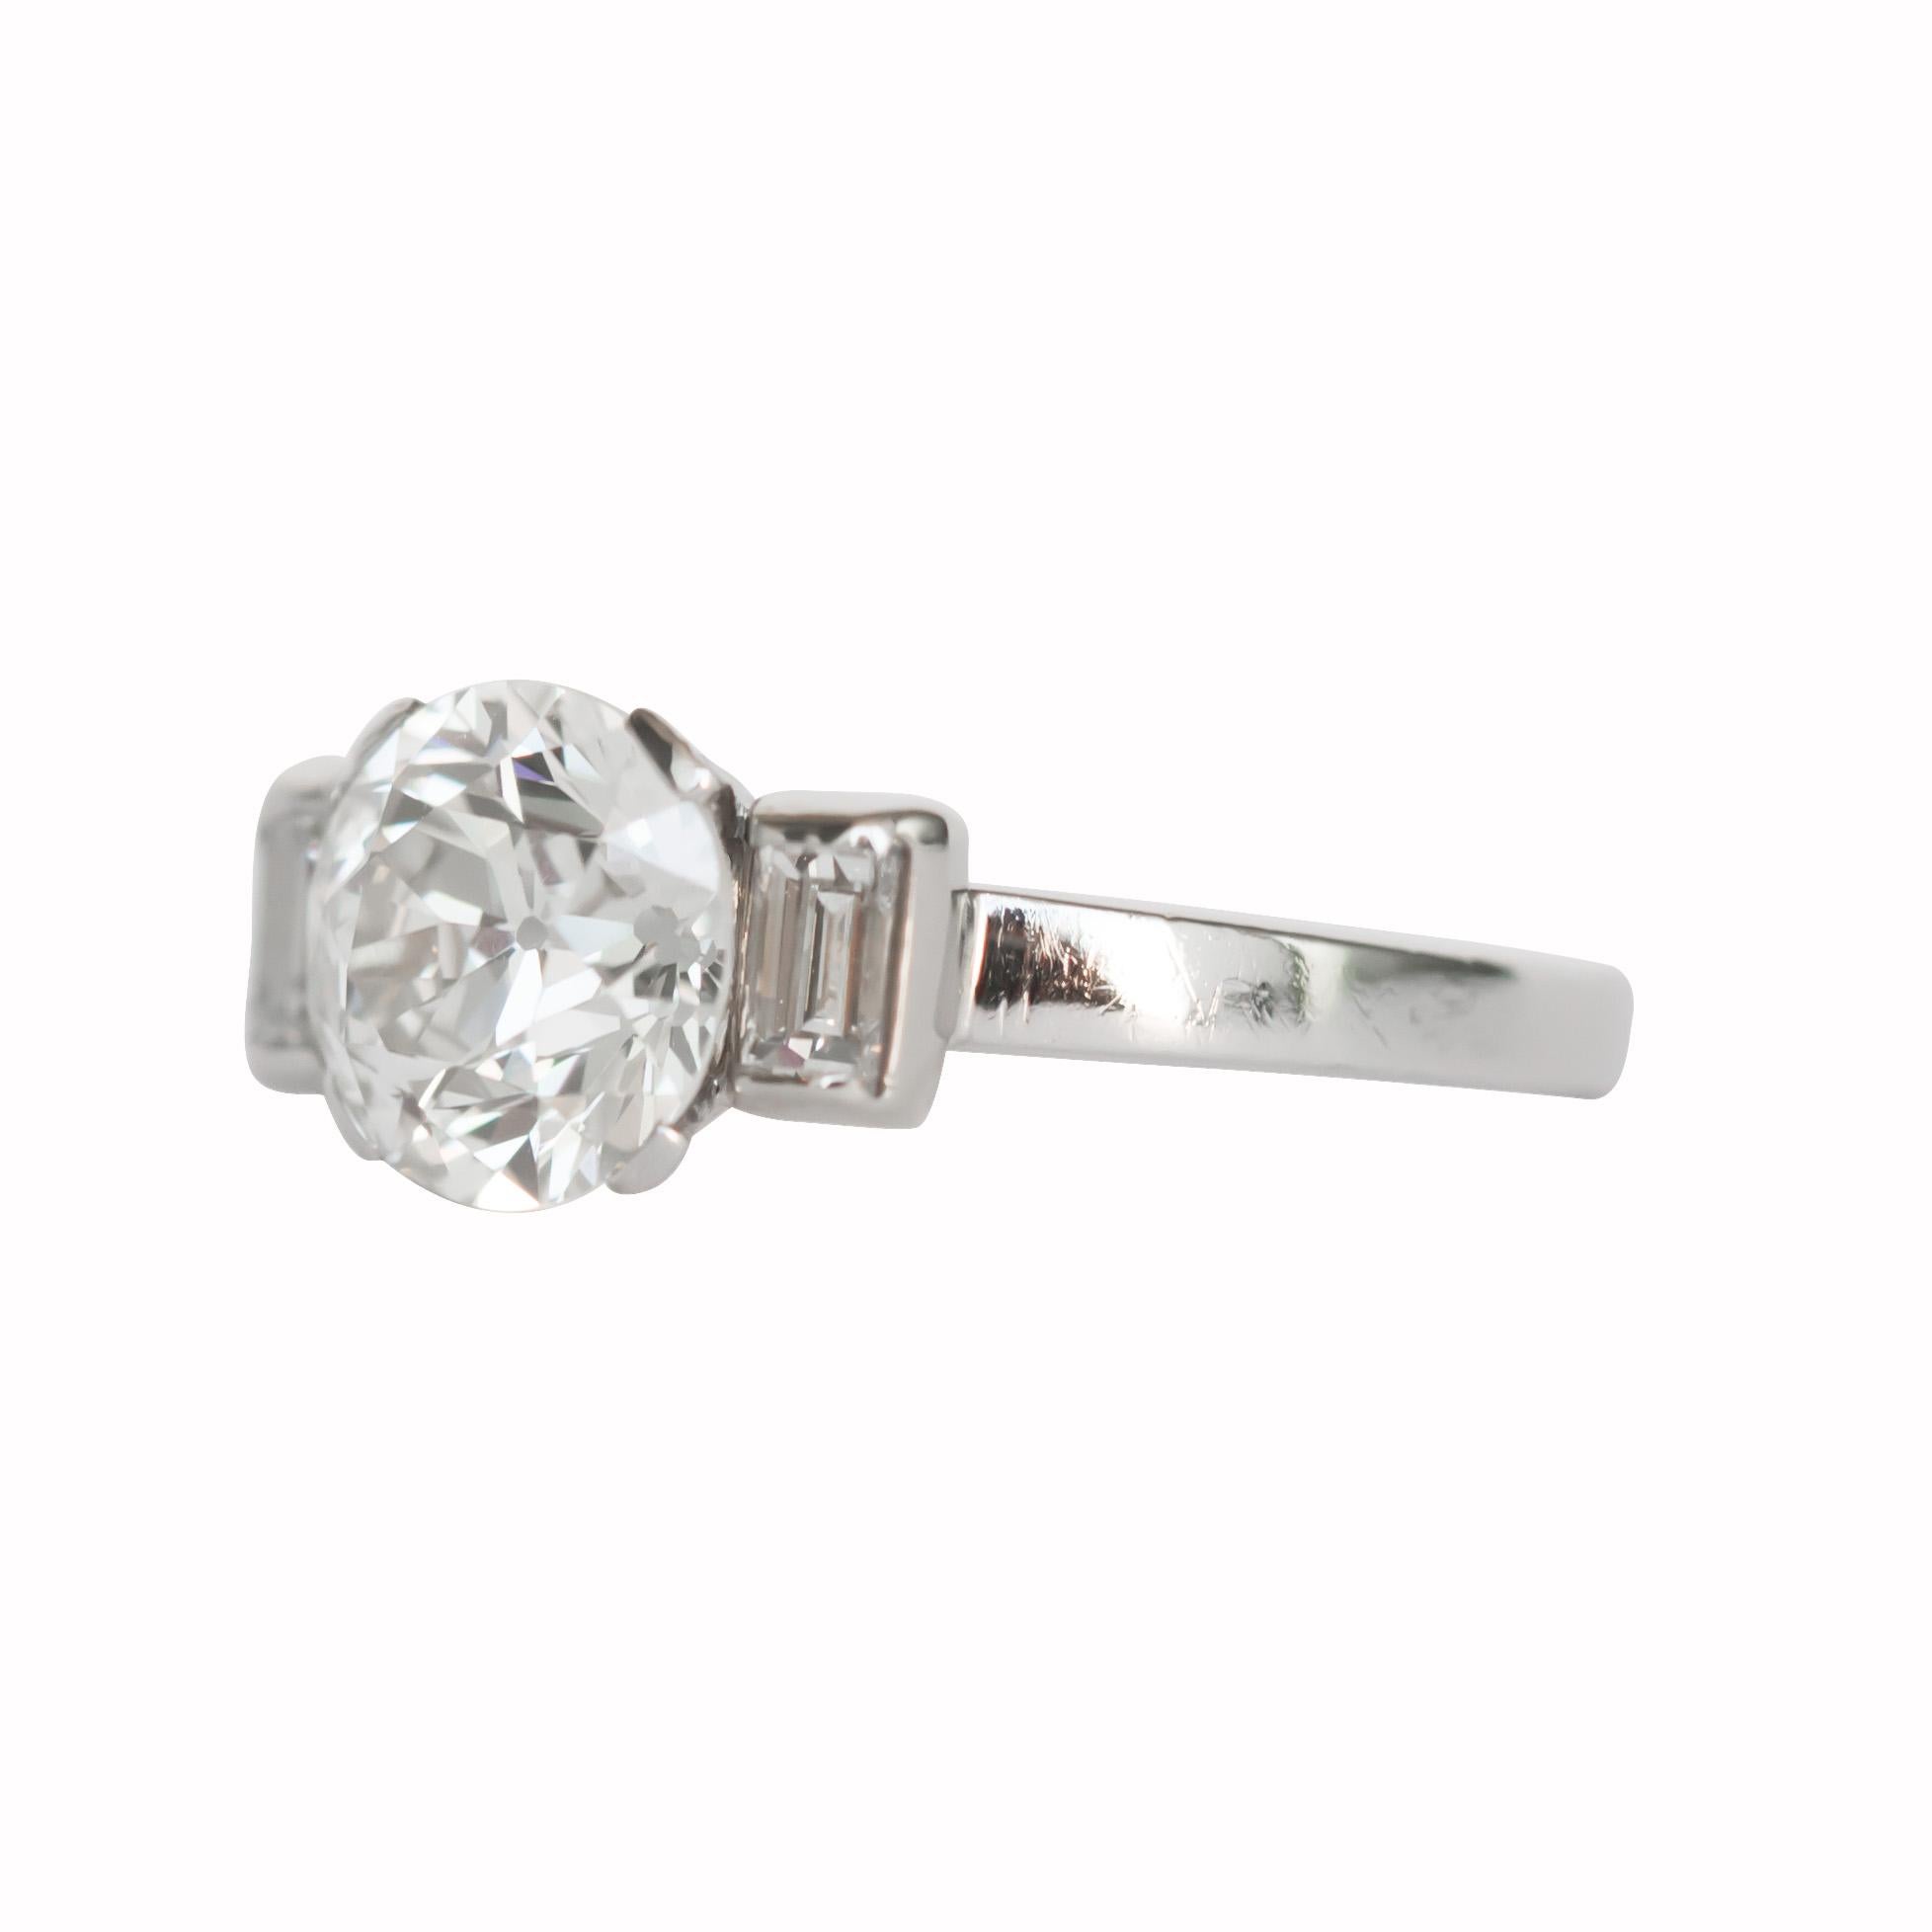 Item Details: 
Ring Size: 5.5
Metal Type: Platinum [Hallmarked, and Tested]
Weight: 4.8 grams

Center Diamond Details:
GIA REPORT # 2203692183
Weight: 1.64 carat
Cut: Old European Brilliant
Color: J
Clarity: VS1

Side Diamond Details:
Weight: .25